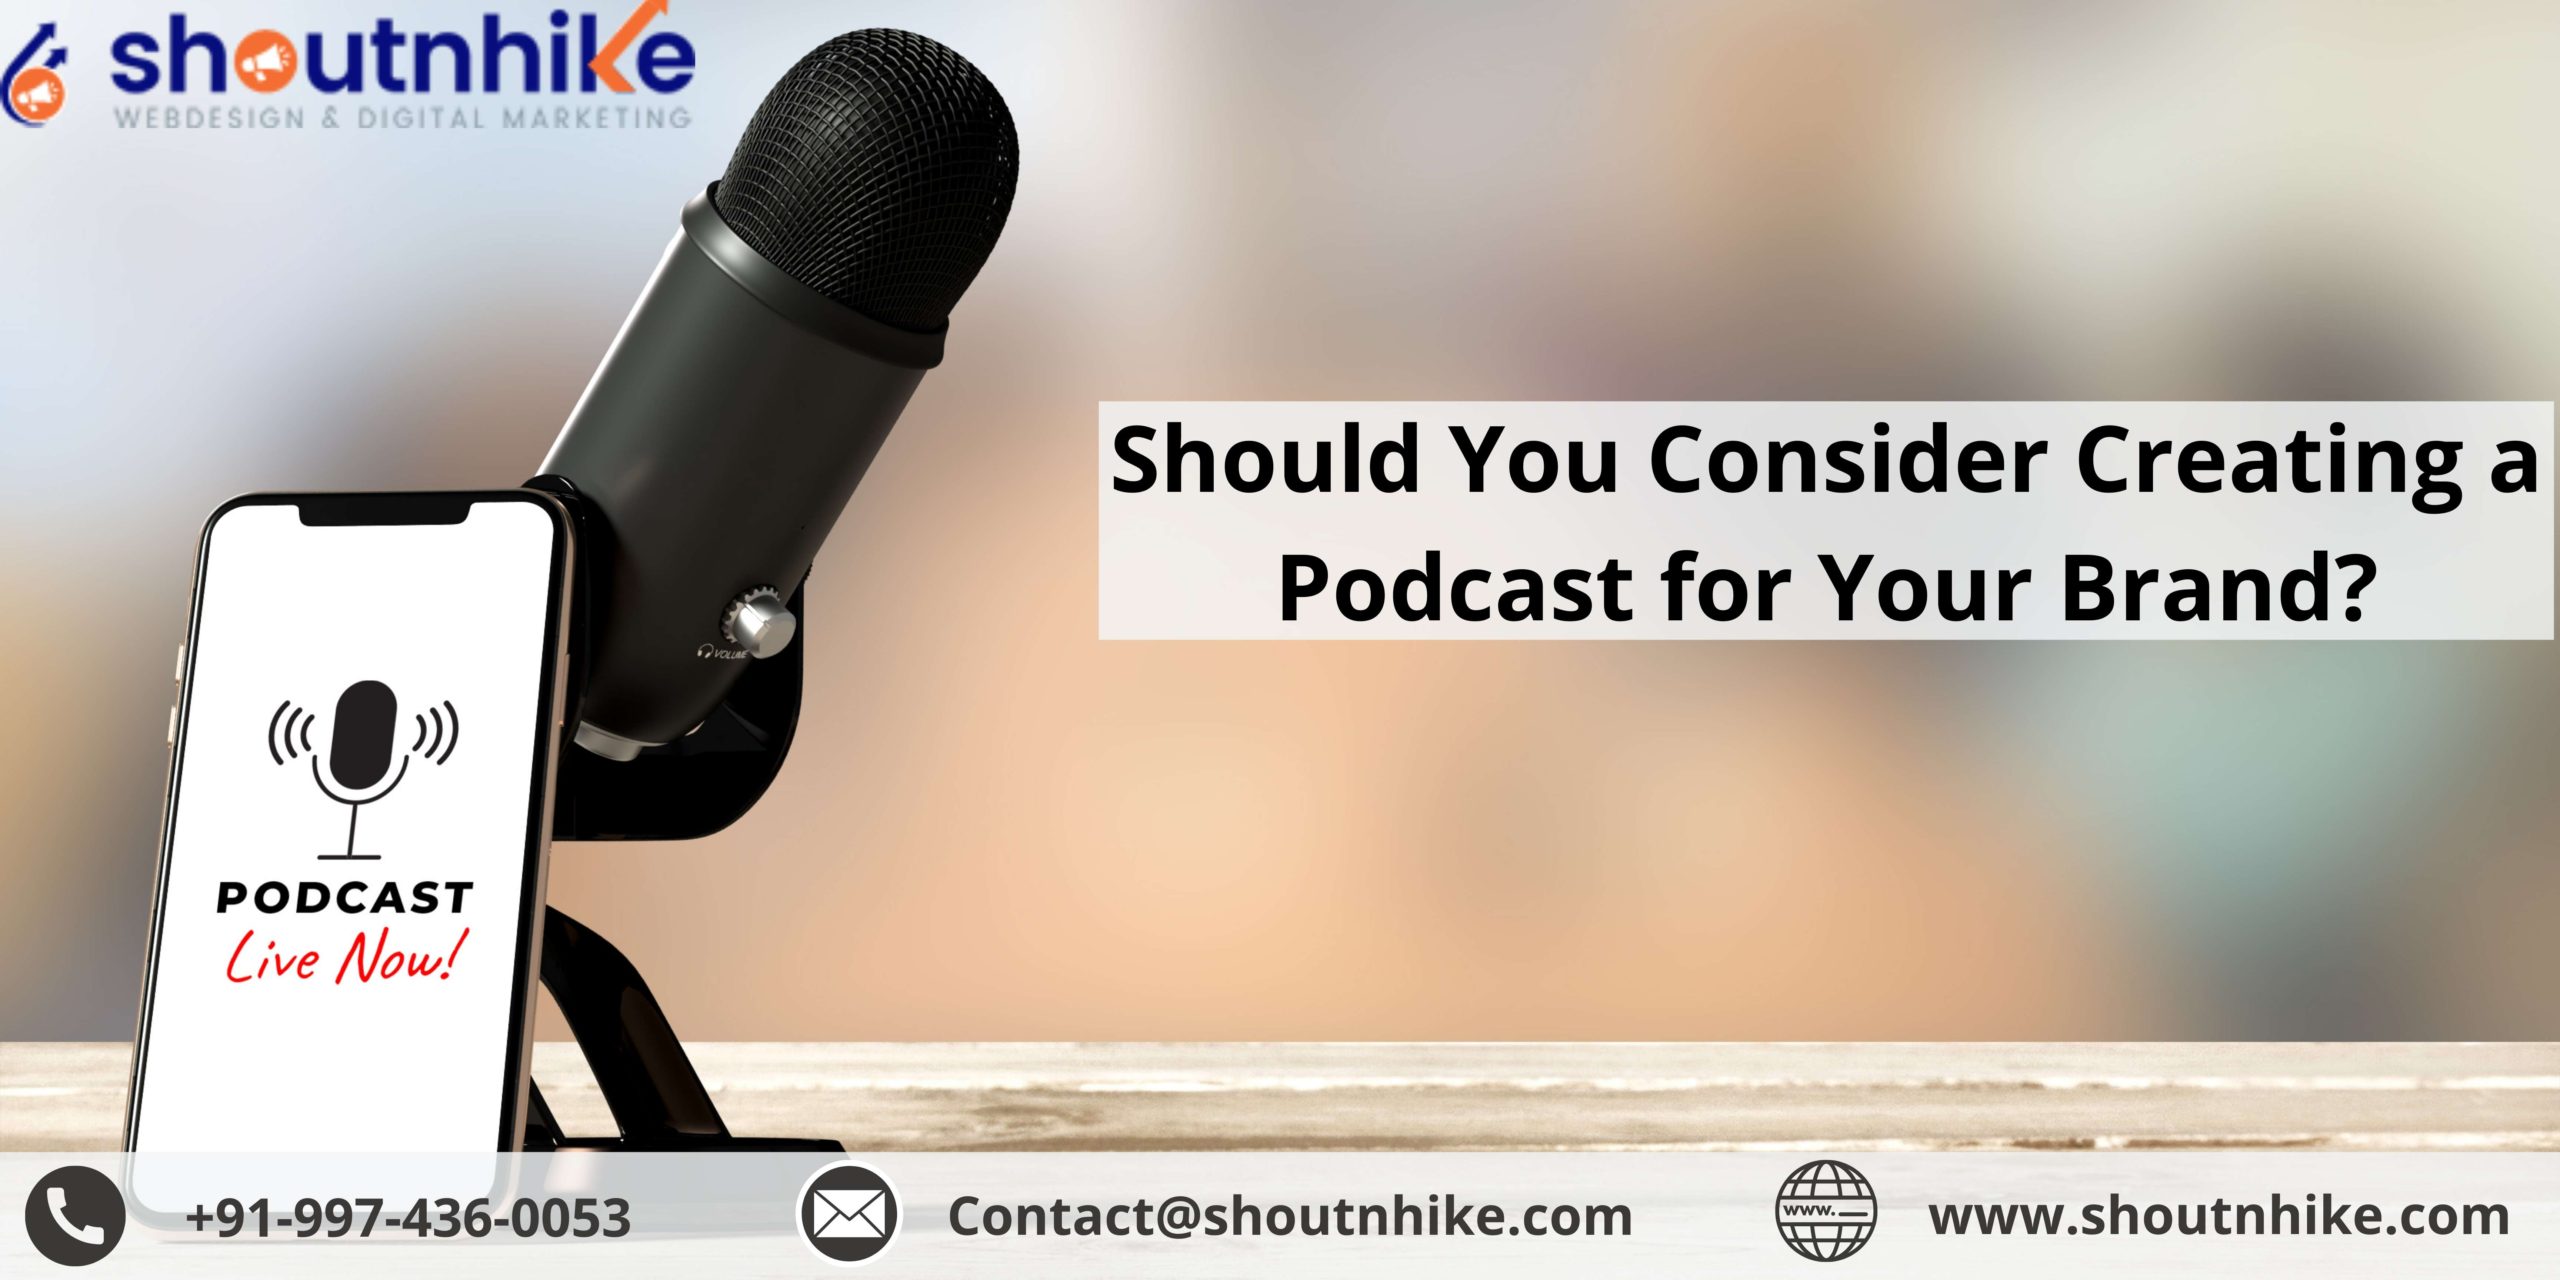 Should You Consider Creating a Podcast for Your Brand